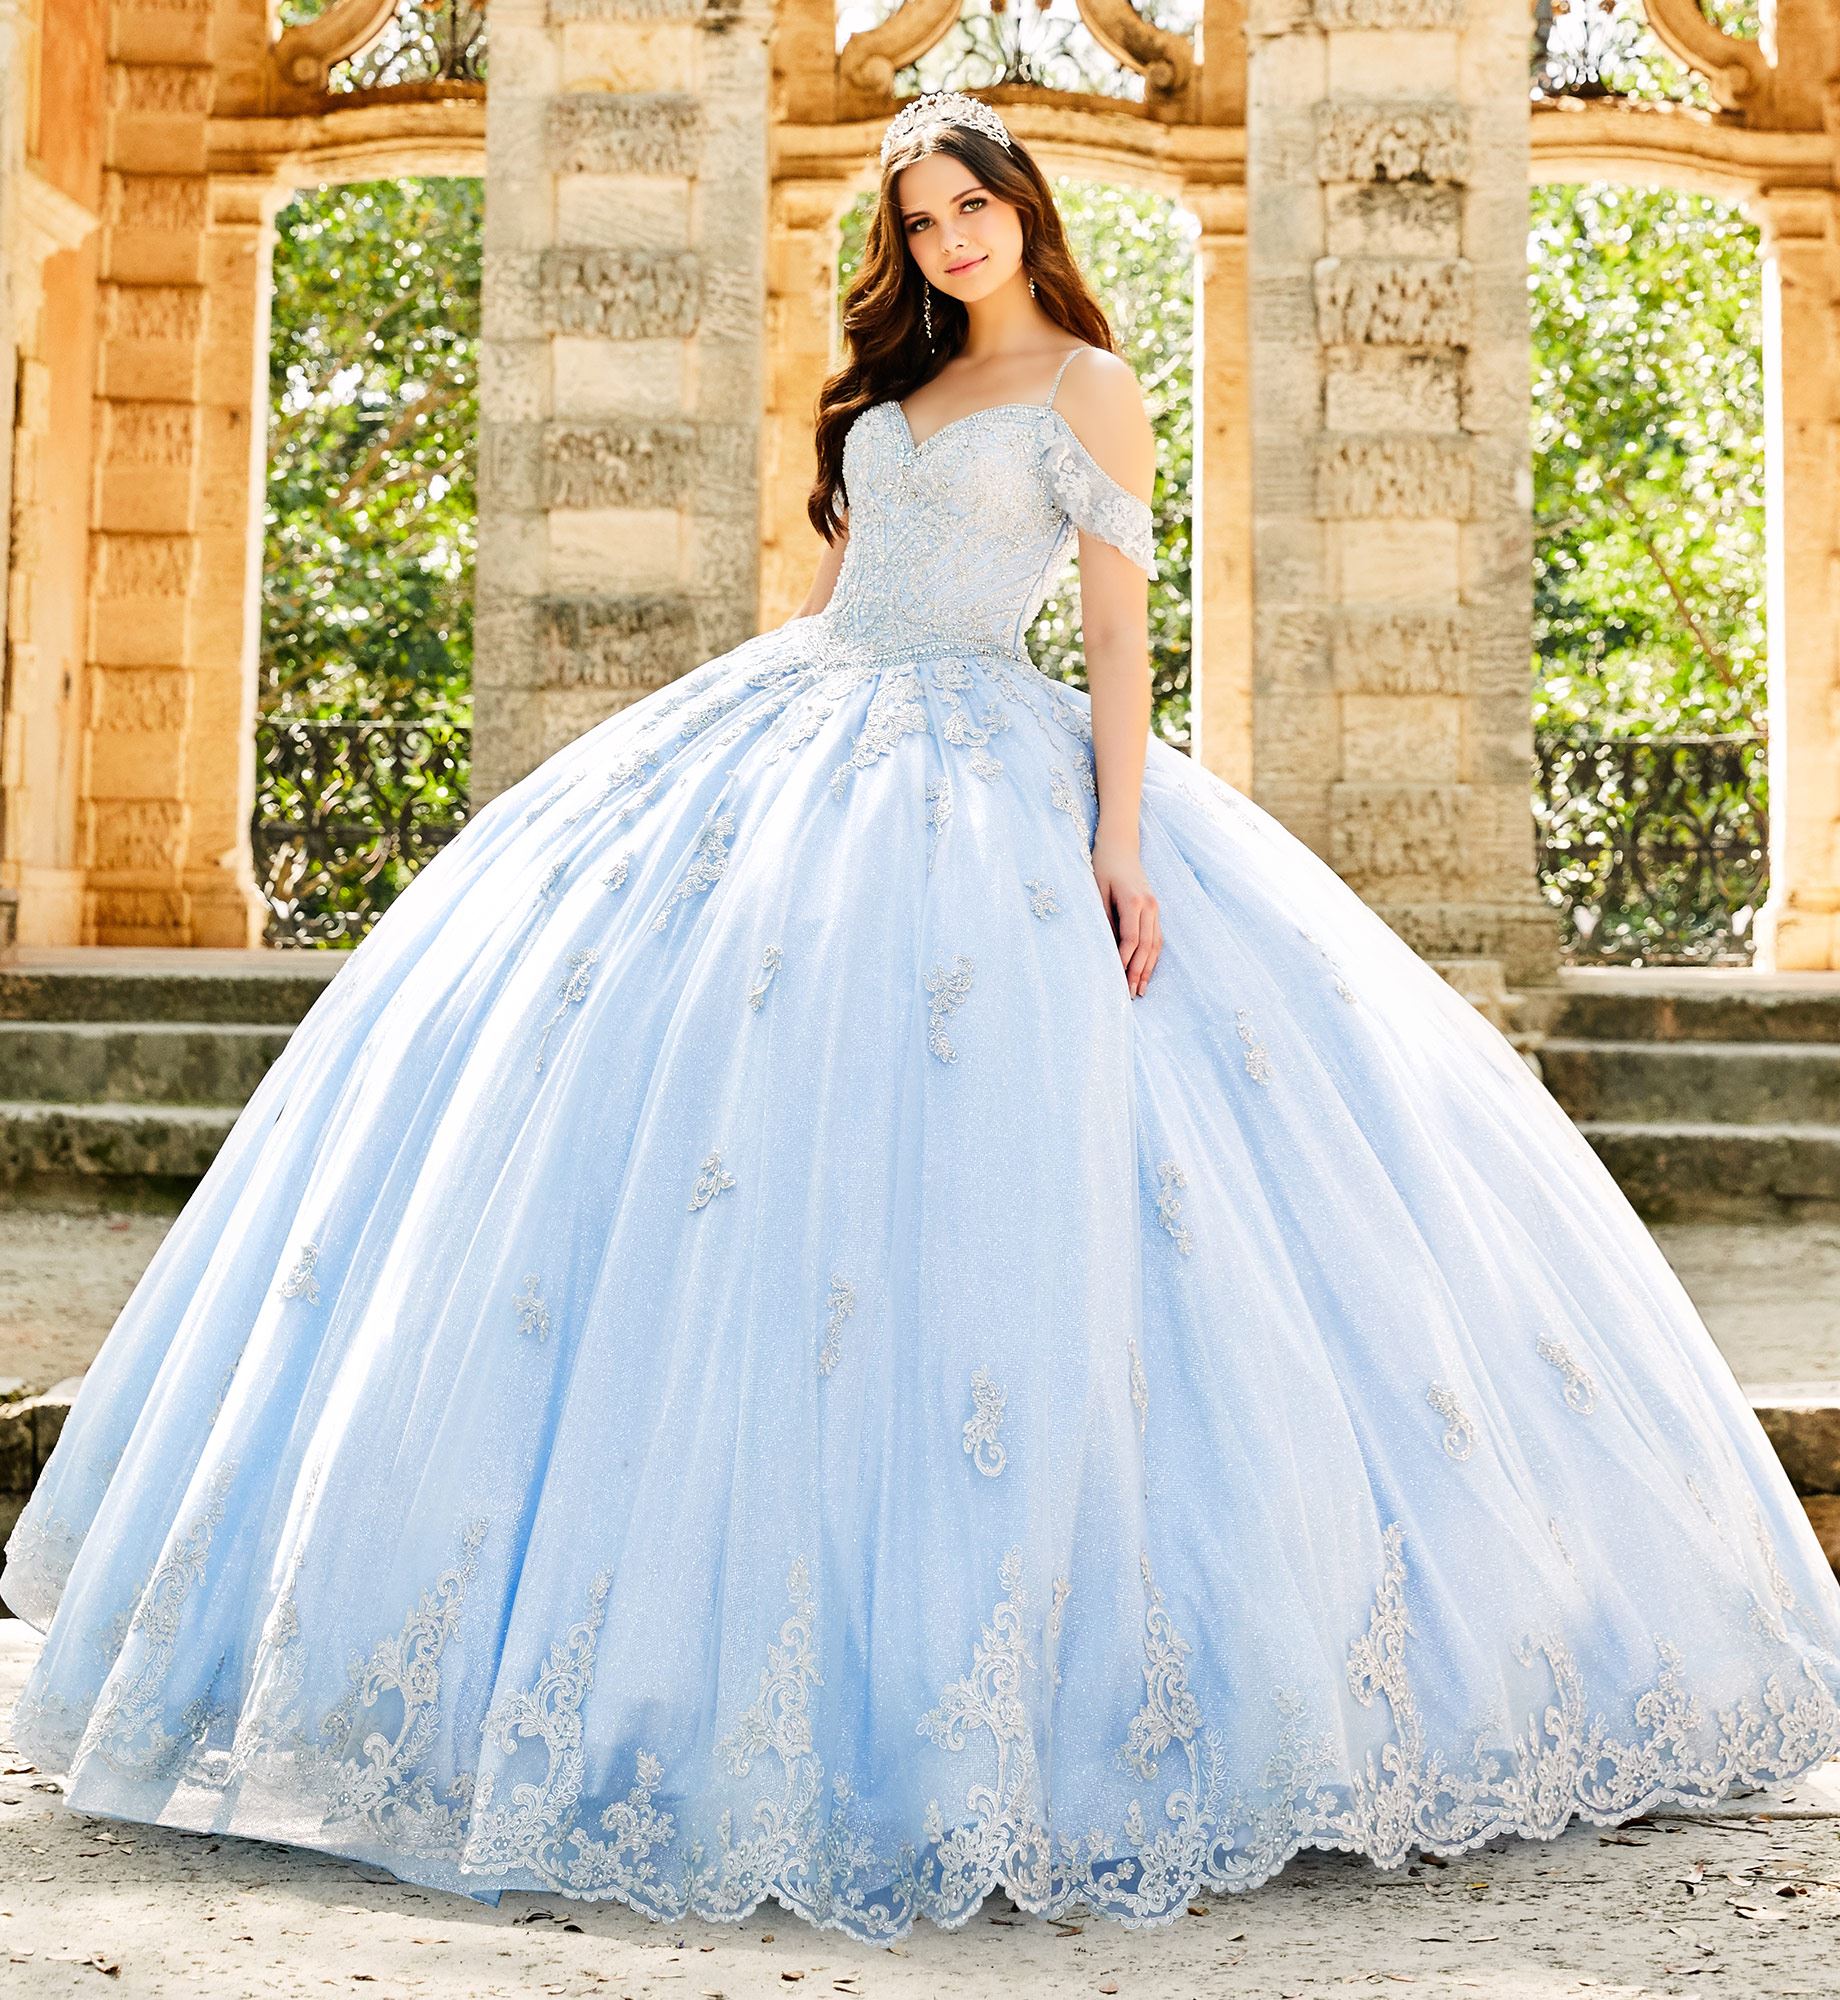 Brunette model in baby blue quinceañera dress with lace embroidery